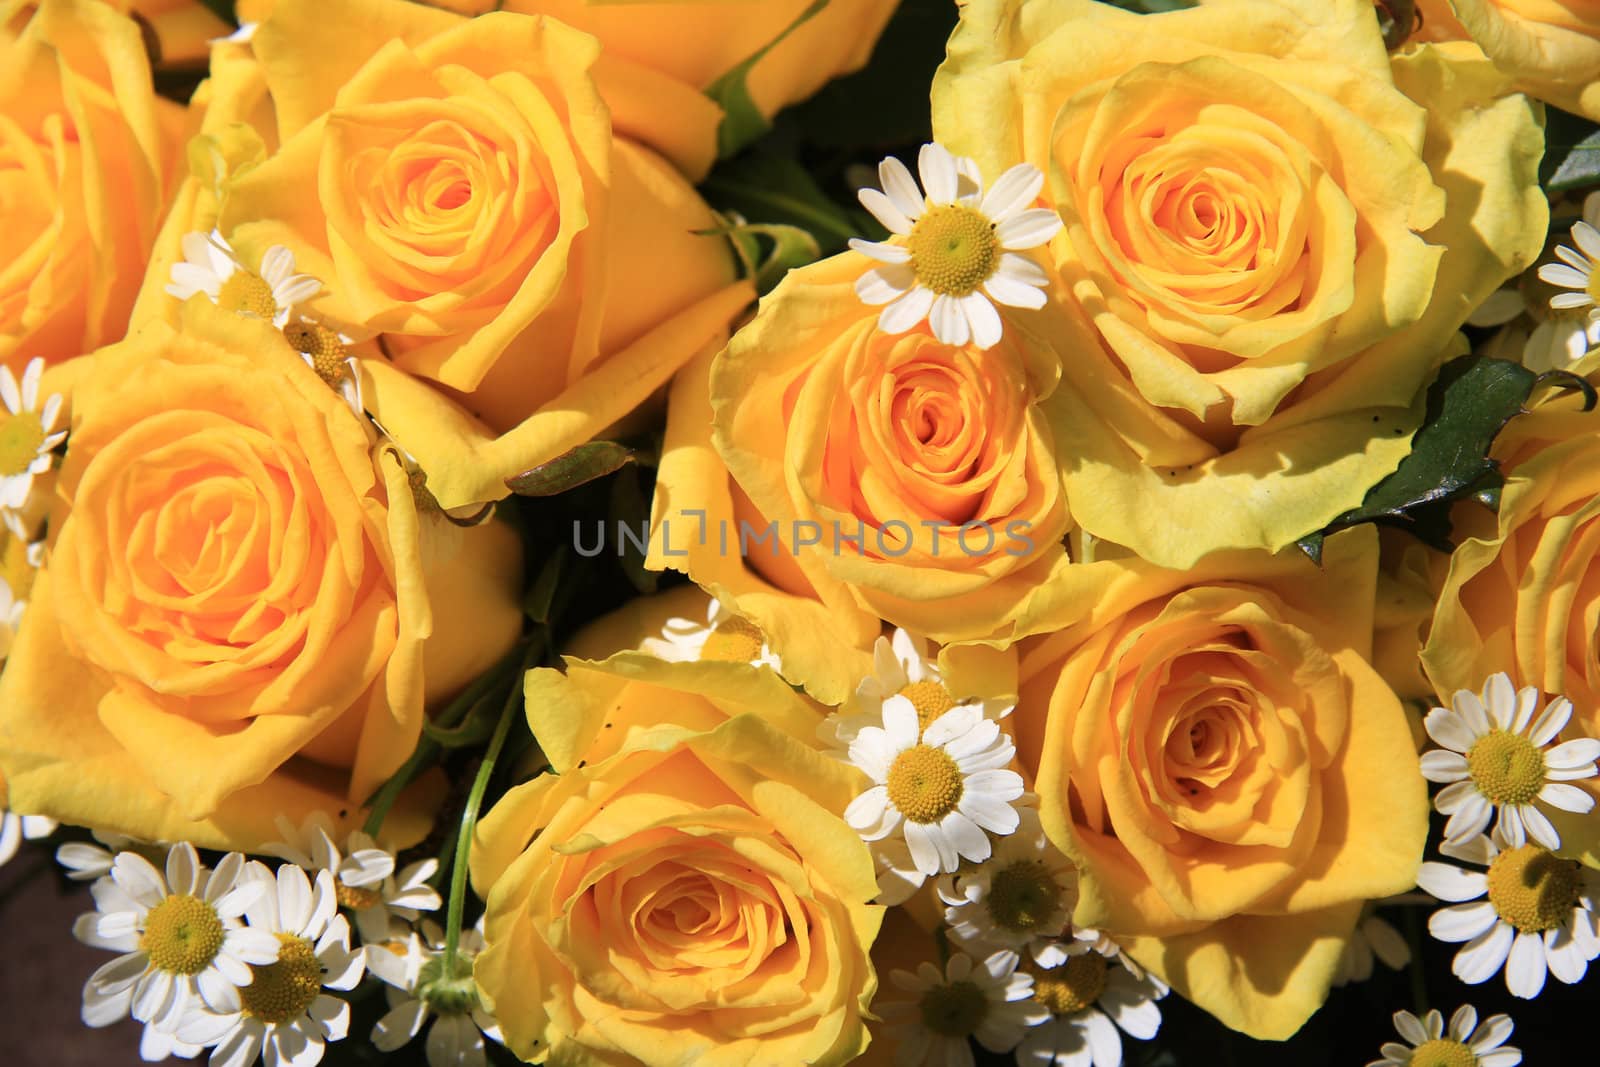 Yellow rose and matricaria bouquet in full sunlight